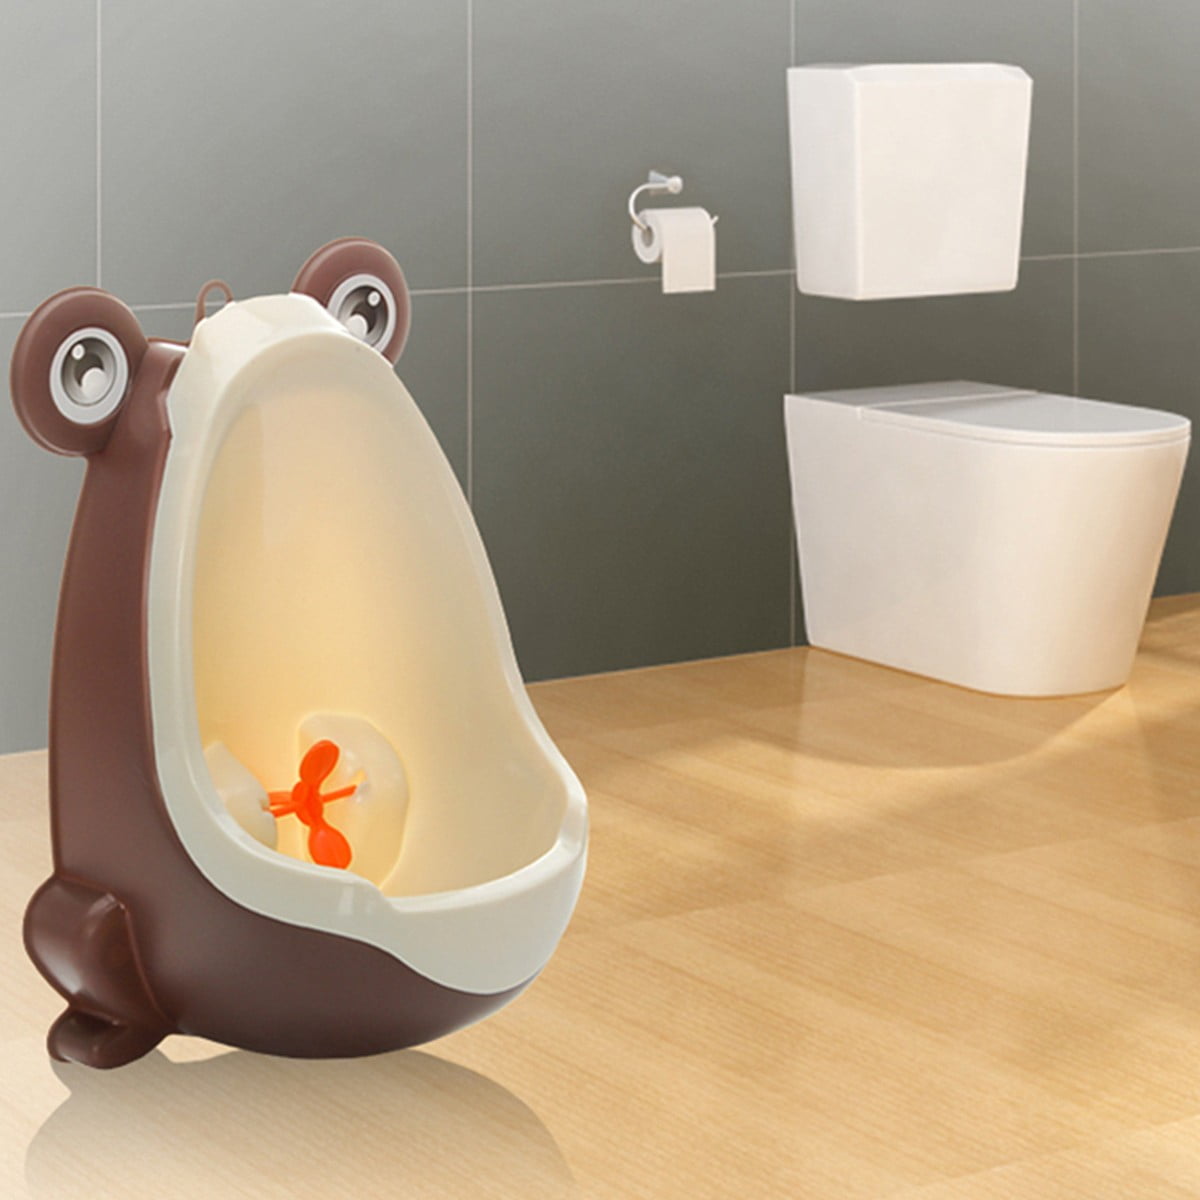 RedSuns Frog Potty Training Urinal for Boys Toddler Kids Urinal Trainer with Funny Aiming Target 